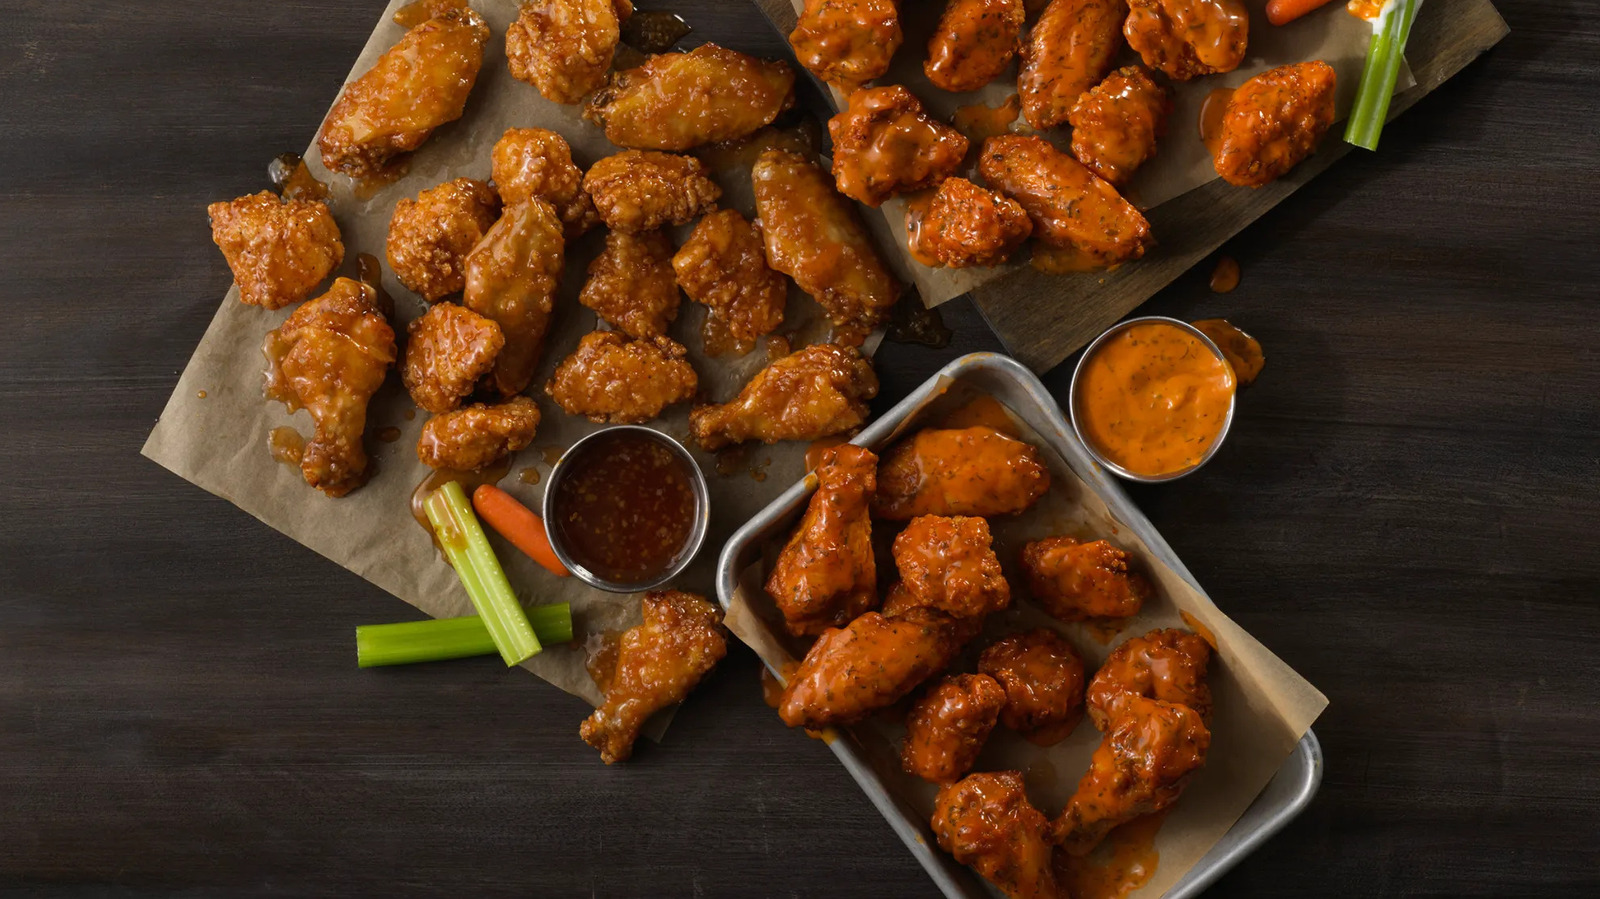 Can you handle the heat?': Buffalo Wild Wings launches new hotter